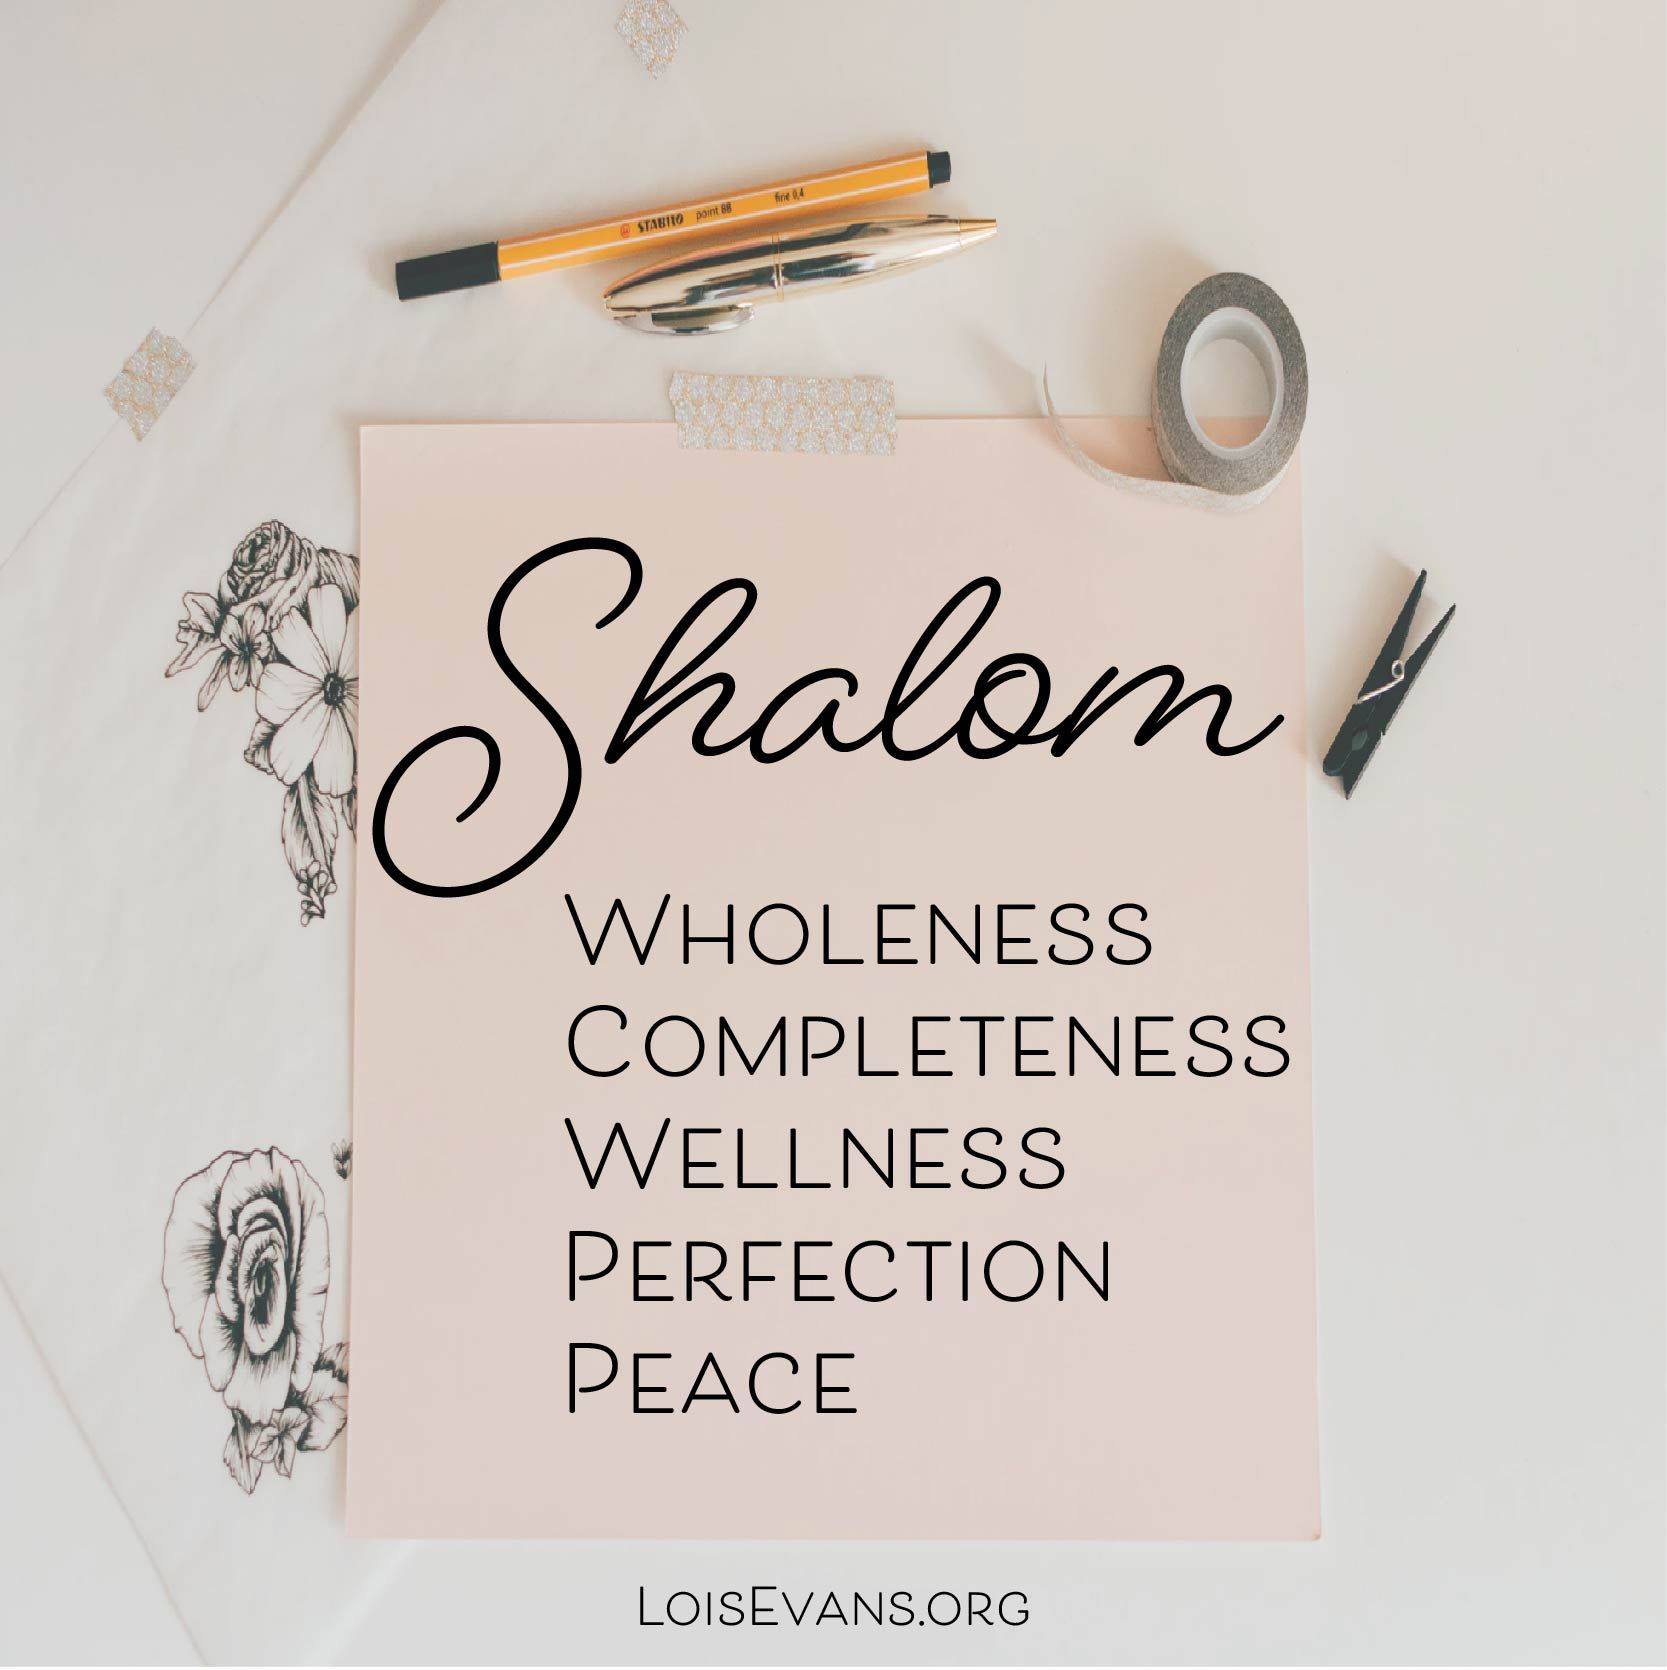 Shalom  Wholeness/Oneness/Justice